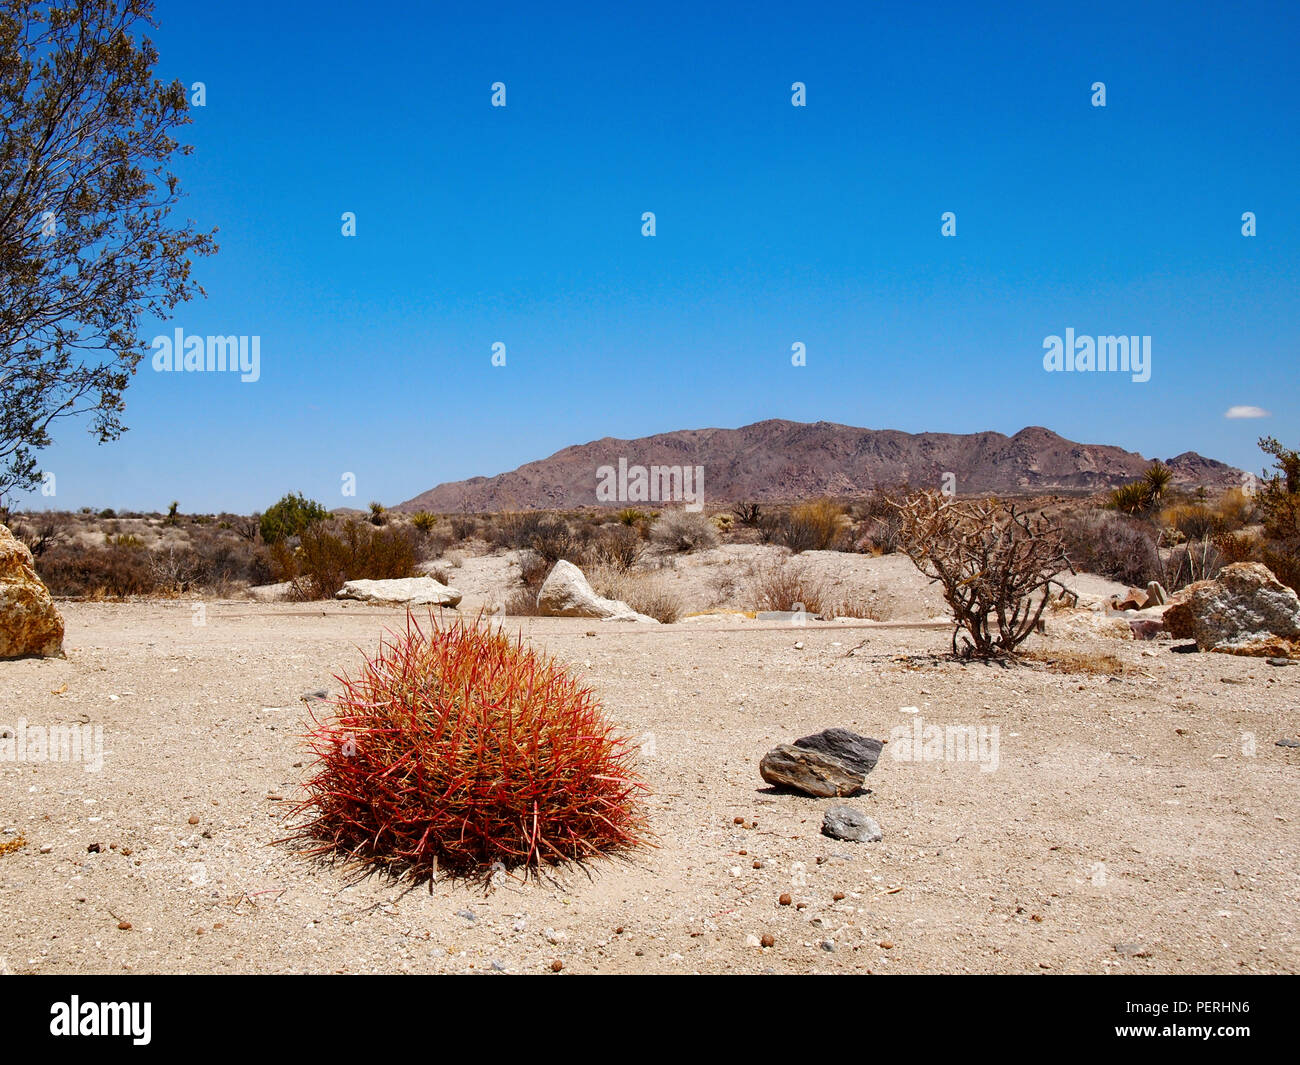 A vibrant red barrel cactus in a horizontal desert landscape in Joshua Tree National Park in southern California, USA. Stock Photo